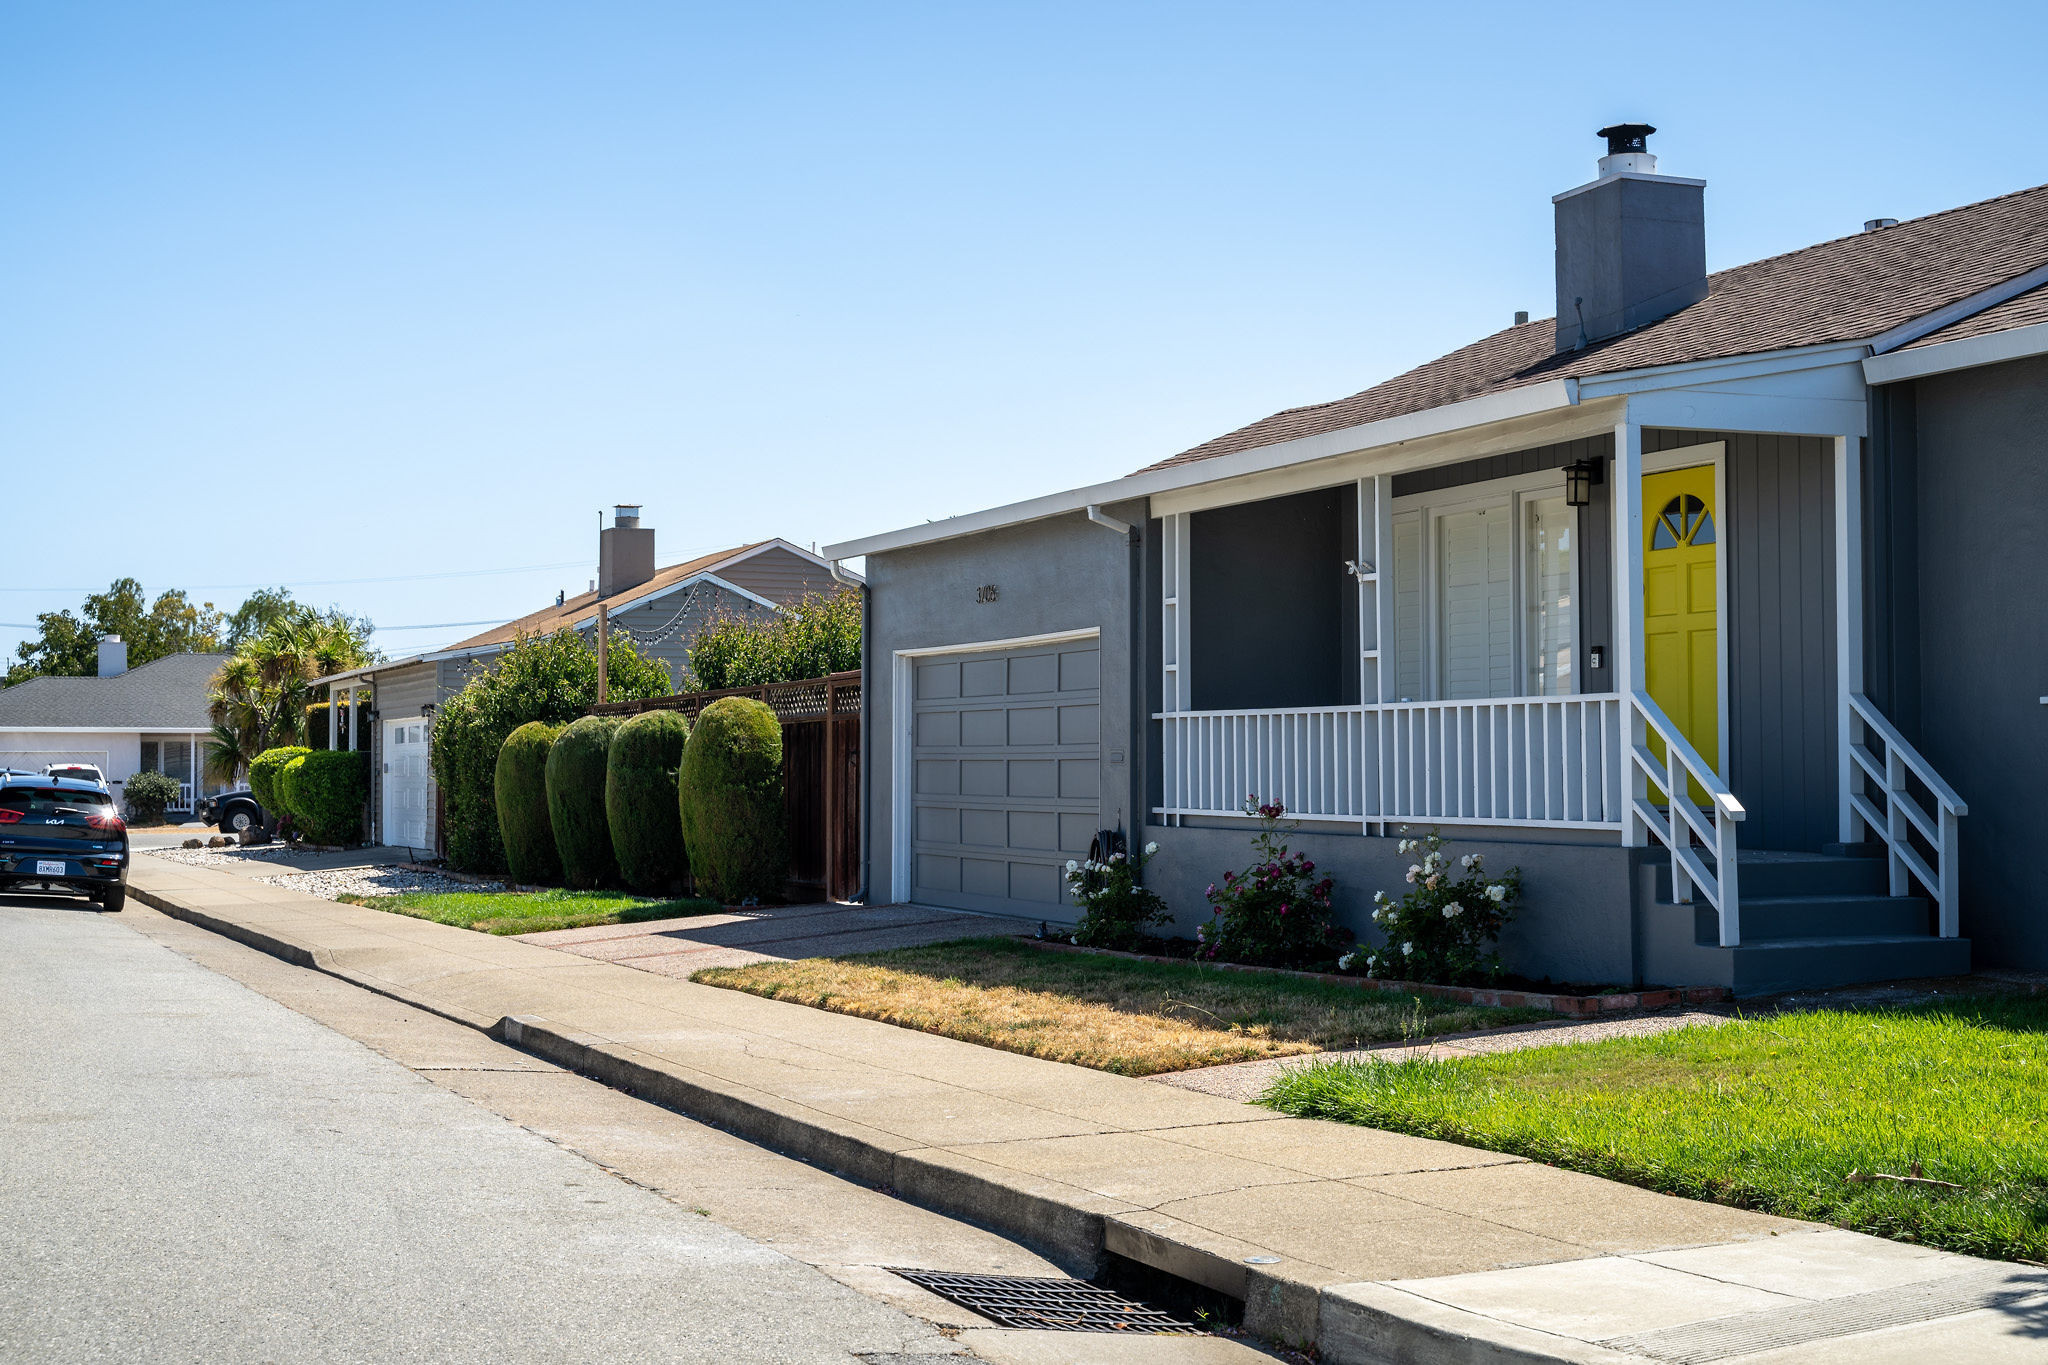 Ranch style home with yellow door in The Village area in San Mateo